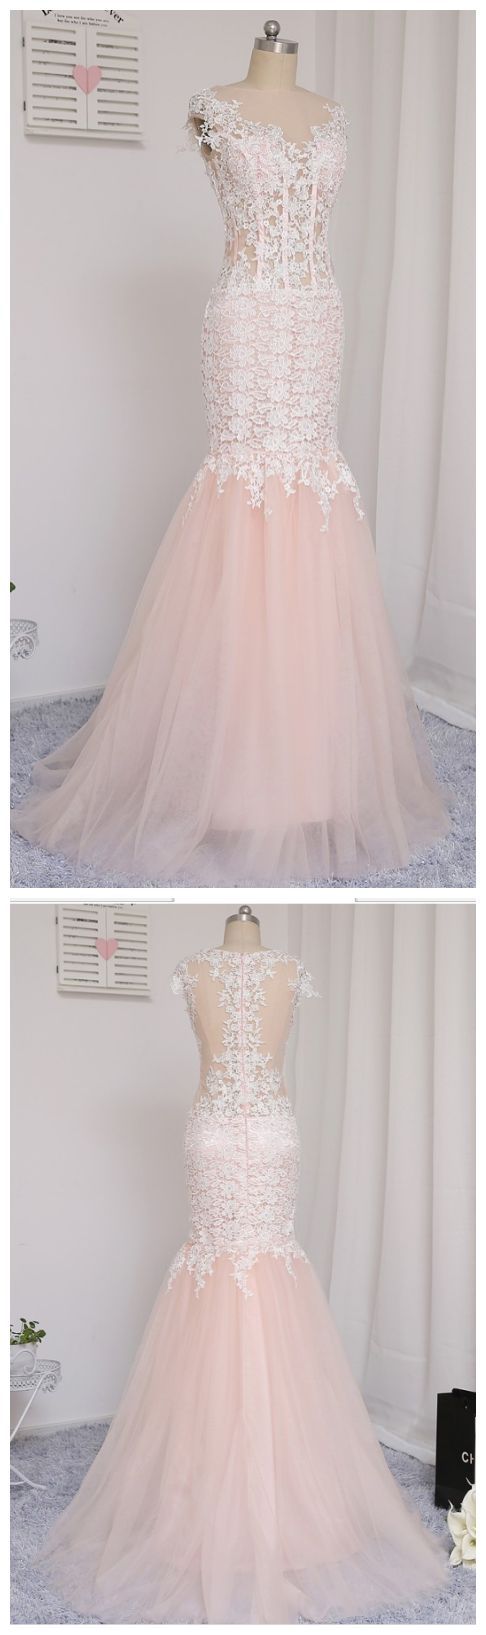 Baby Pink Appliques Mermaid Evening Dress, Formal Long Prom Dresses, Wedding Party Gown M7339